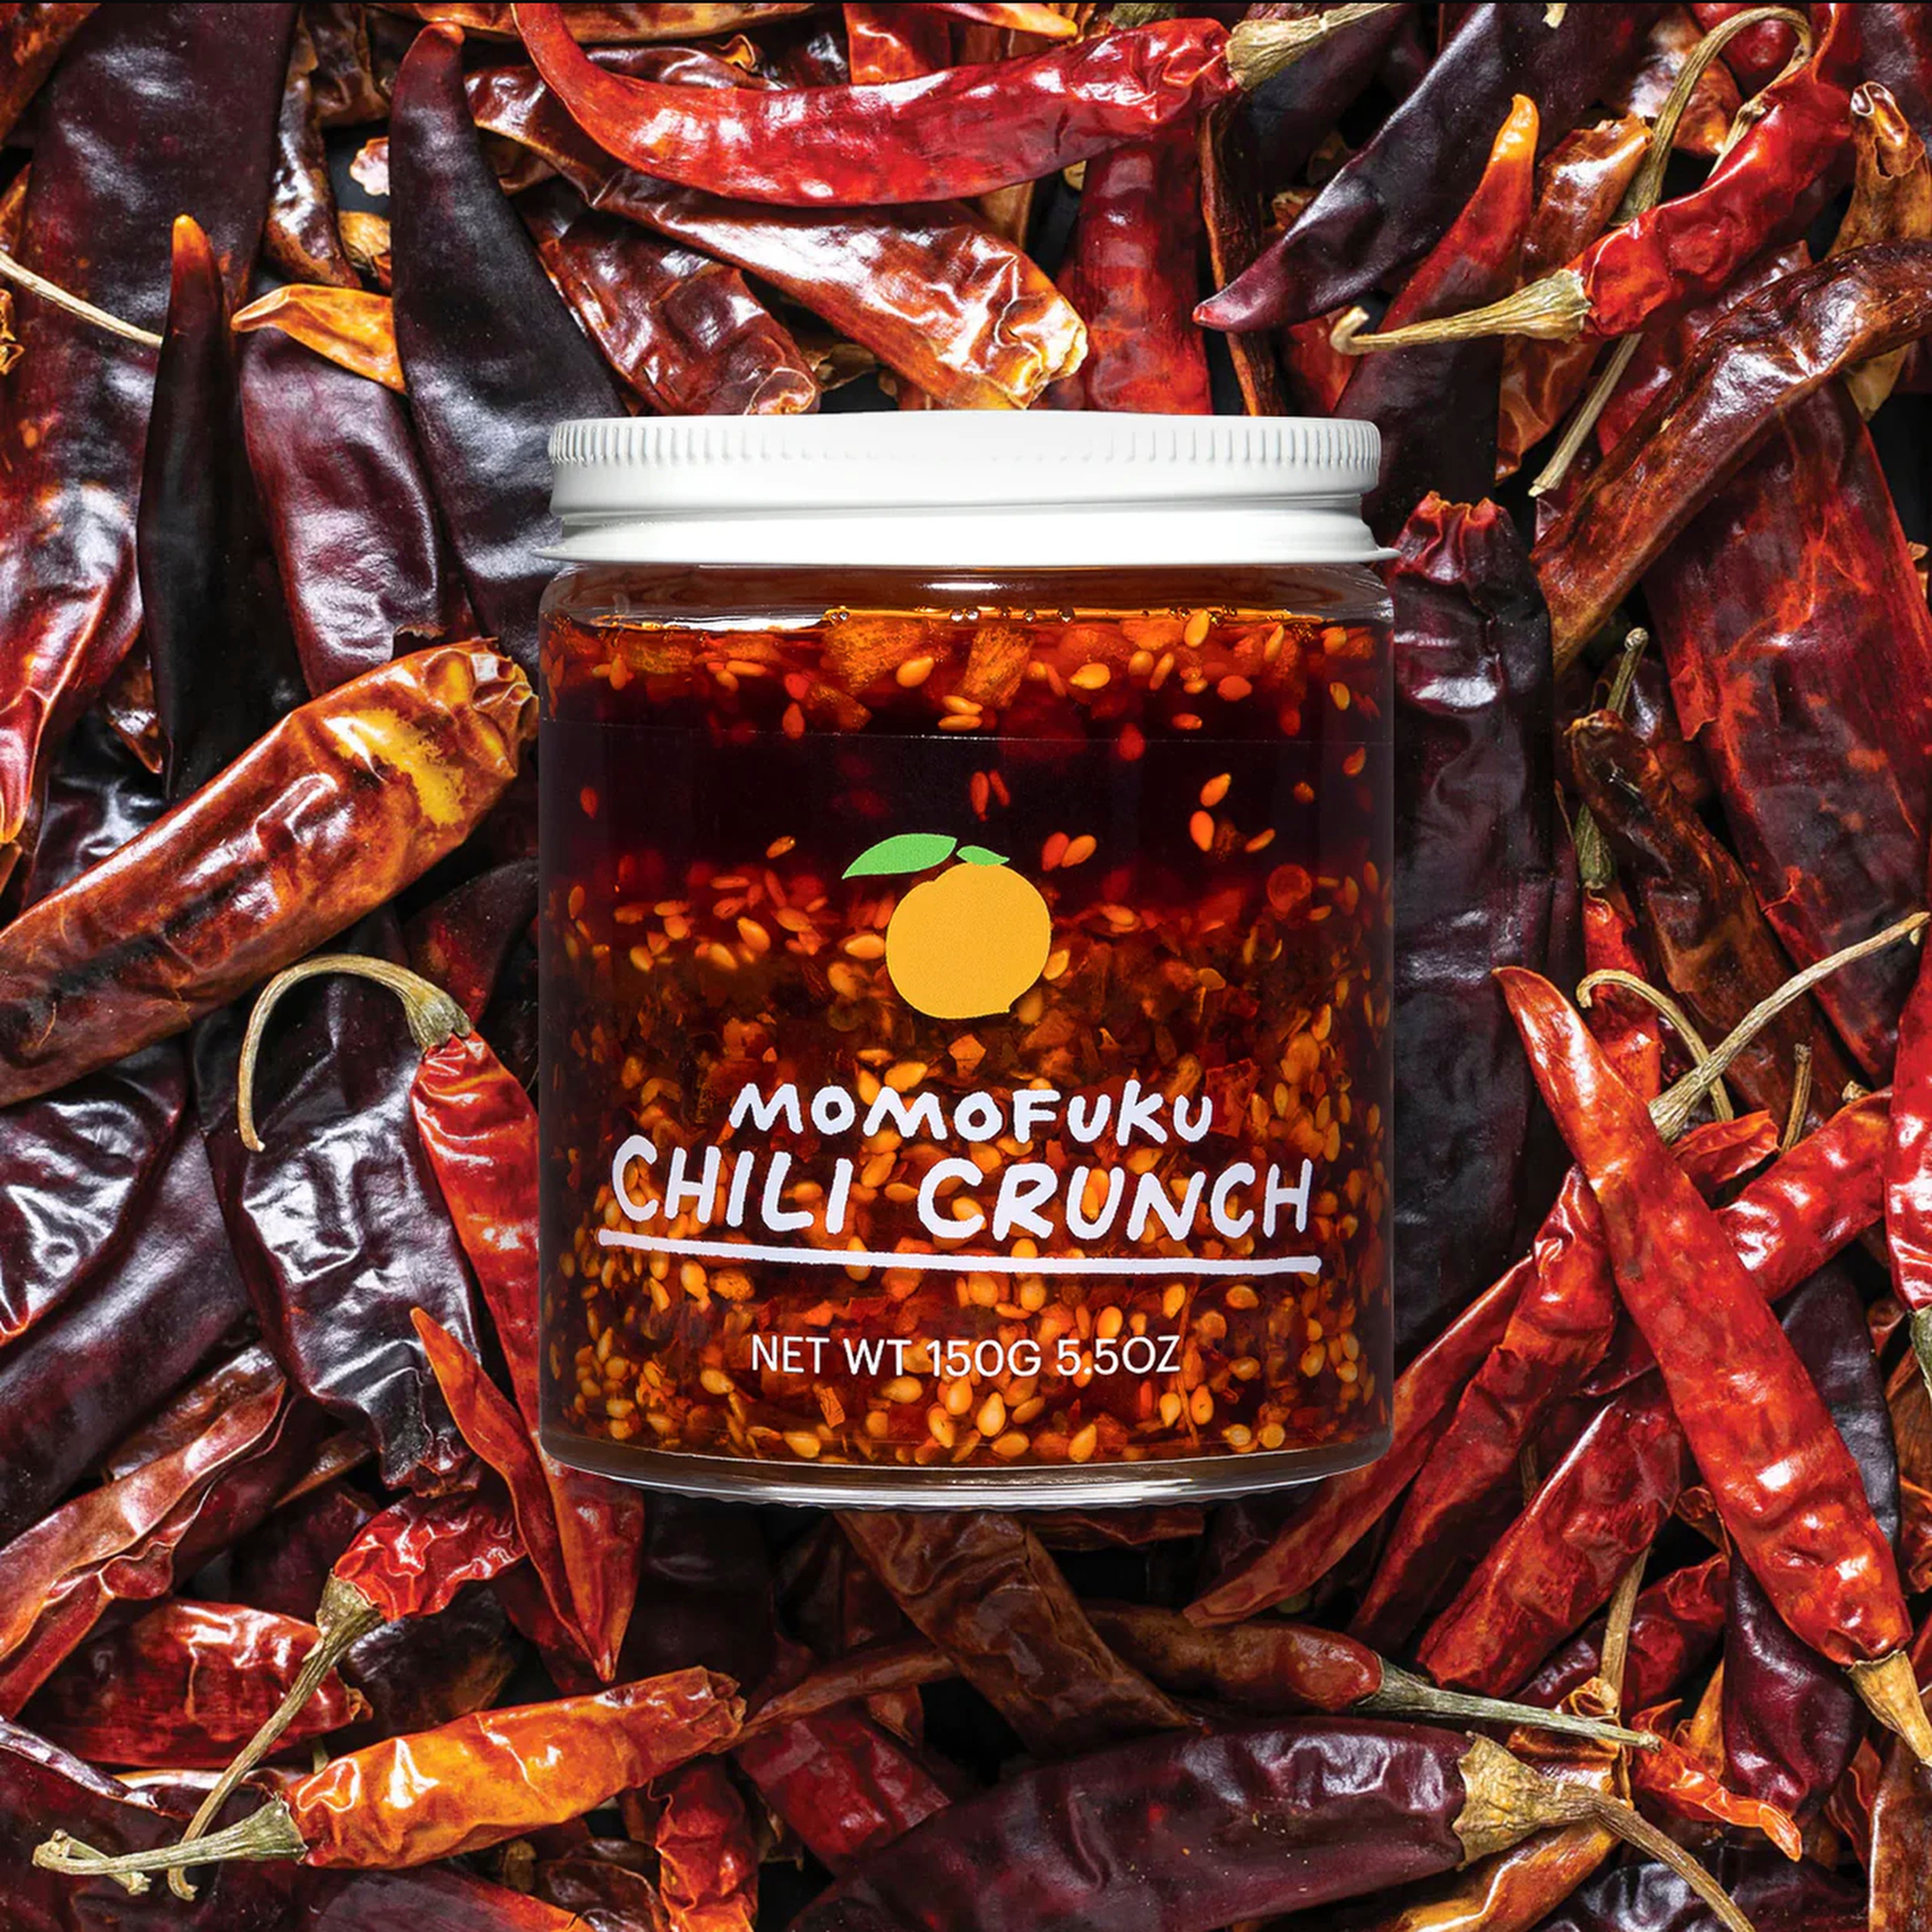 A publicity shot for Momofuku chili crisp. Celebrity chef David Chang’s culinary empire has applied to trademark “chili crunch” in the United States, angering small producers. some of whom have received cease-and-desist letters from its lawyers. Photo: Momofuku